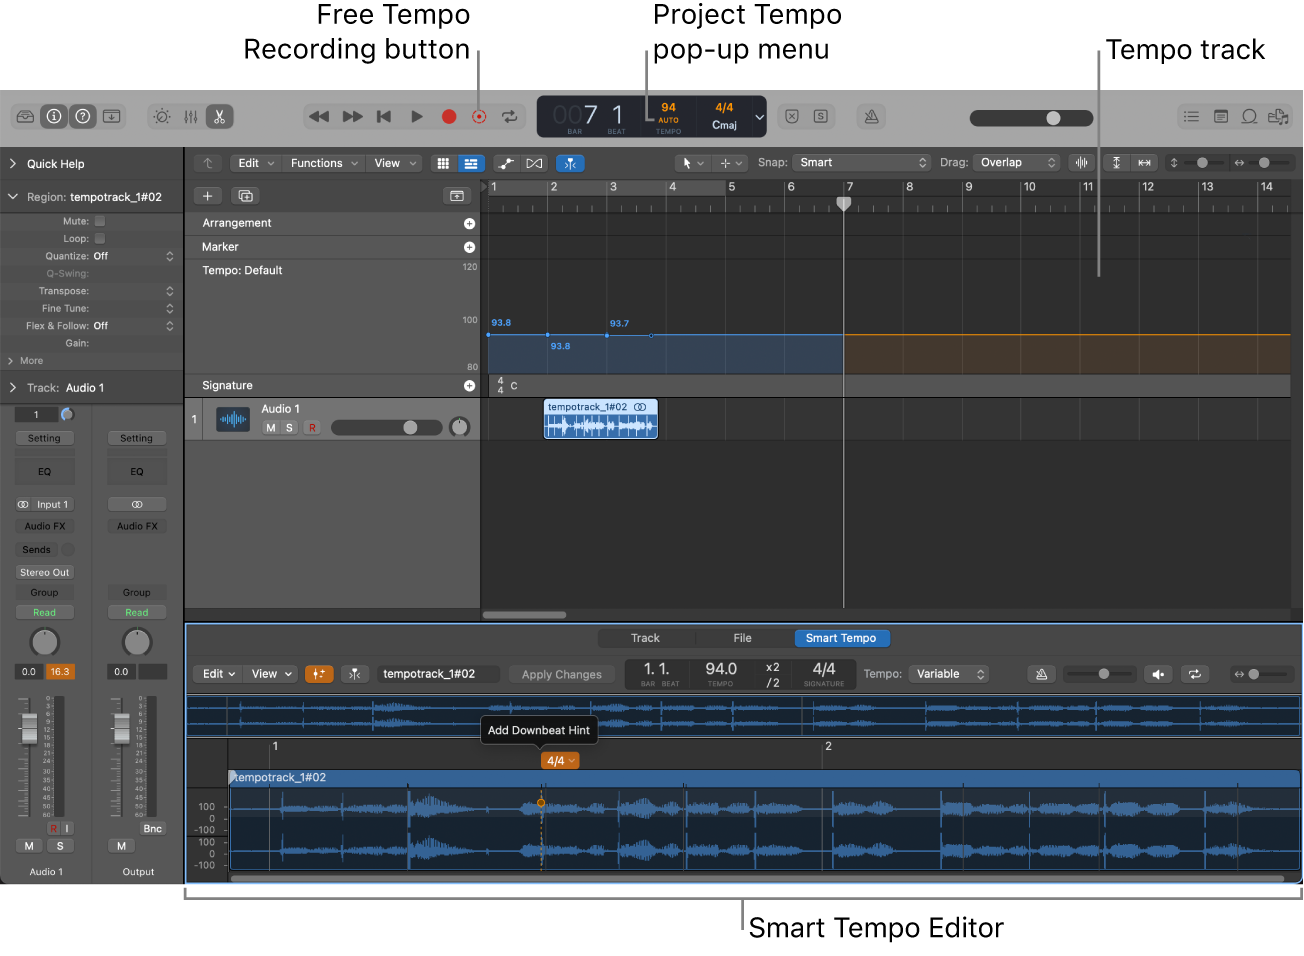 Figure. Project showing recording, Adapt mode chosen, tempo changes in the Tempo track, and the Smart Tempo Editor open.